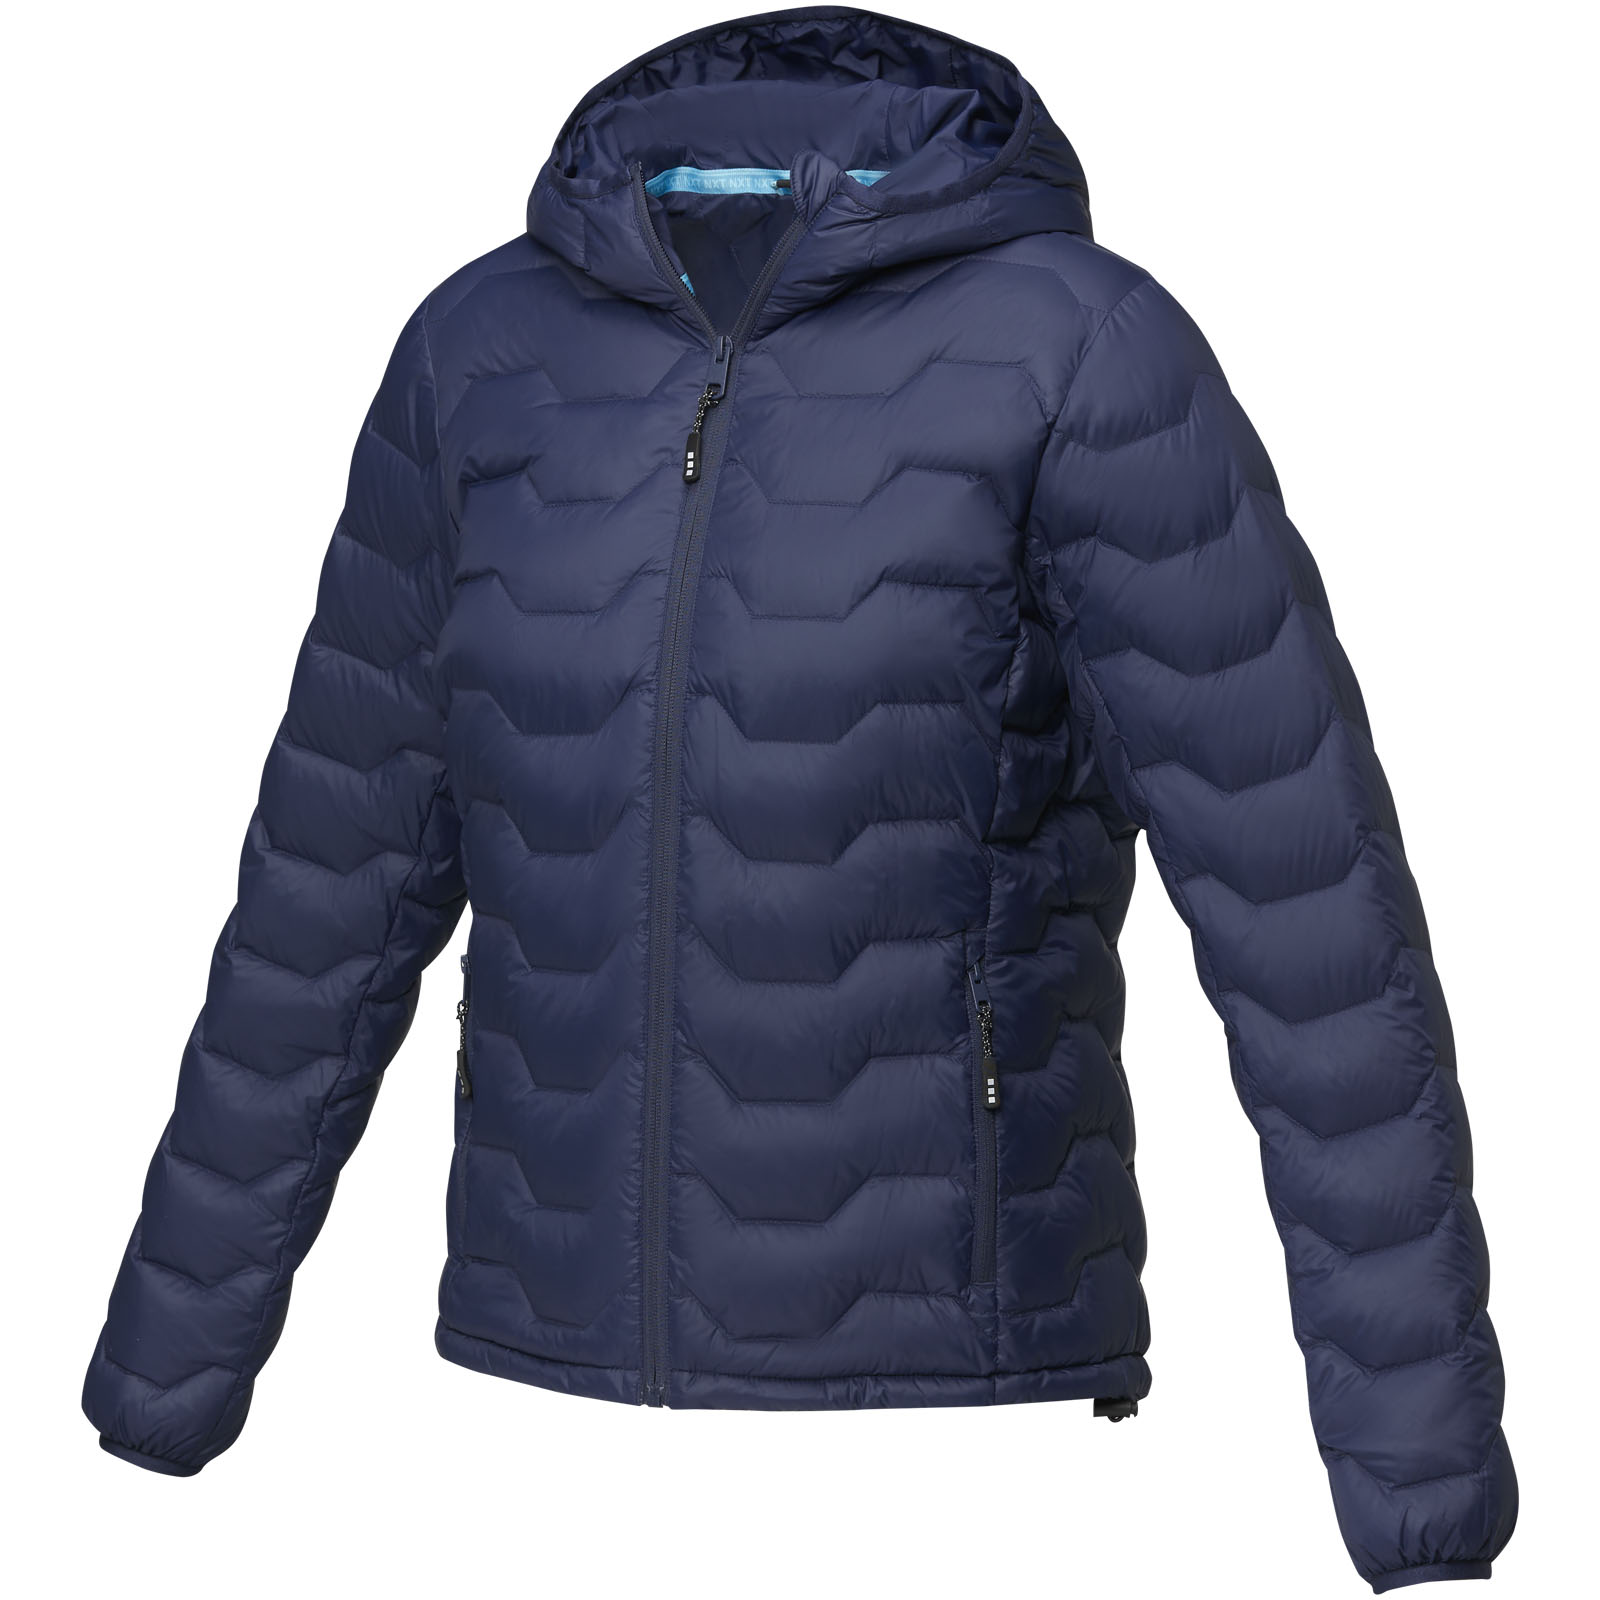 Clothing - Petalite women's GRS recycled insulated down jacket